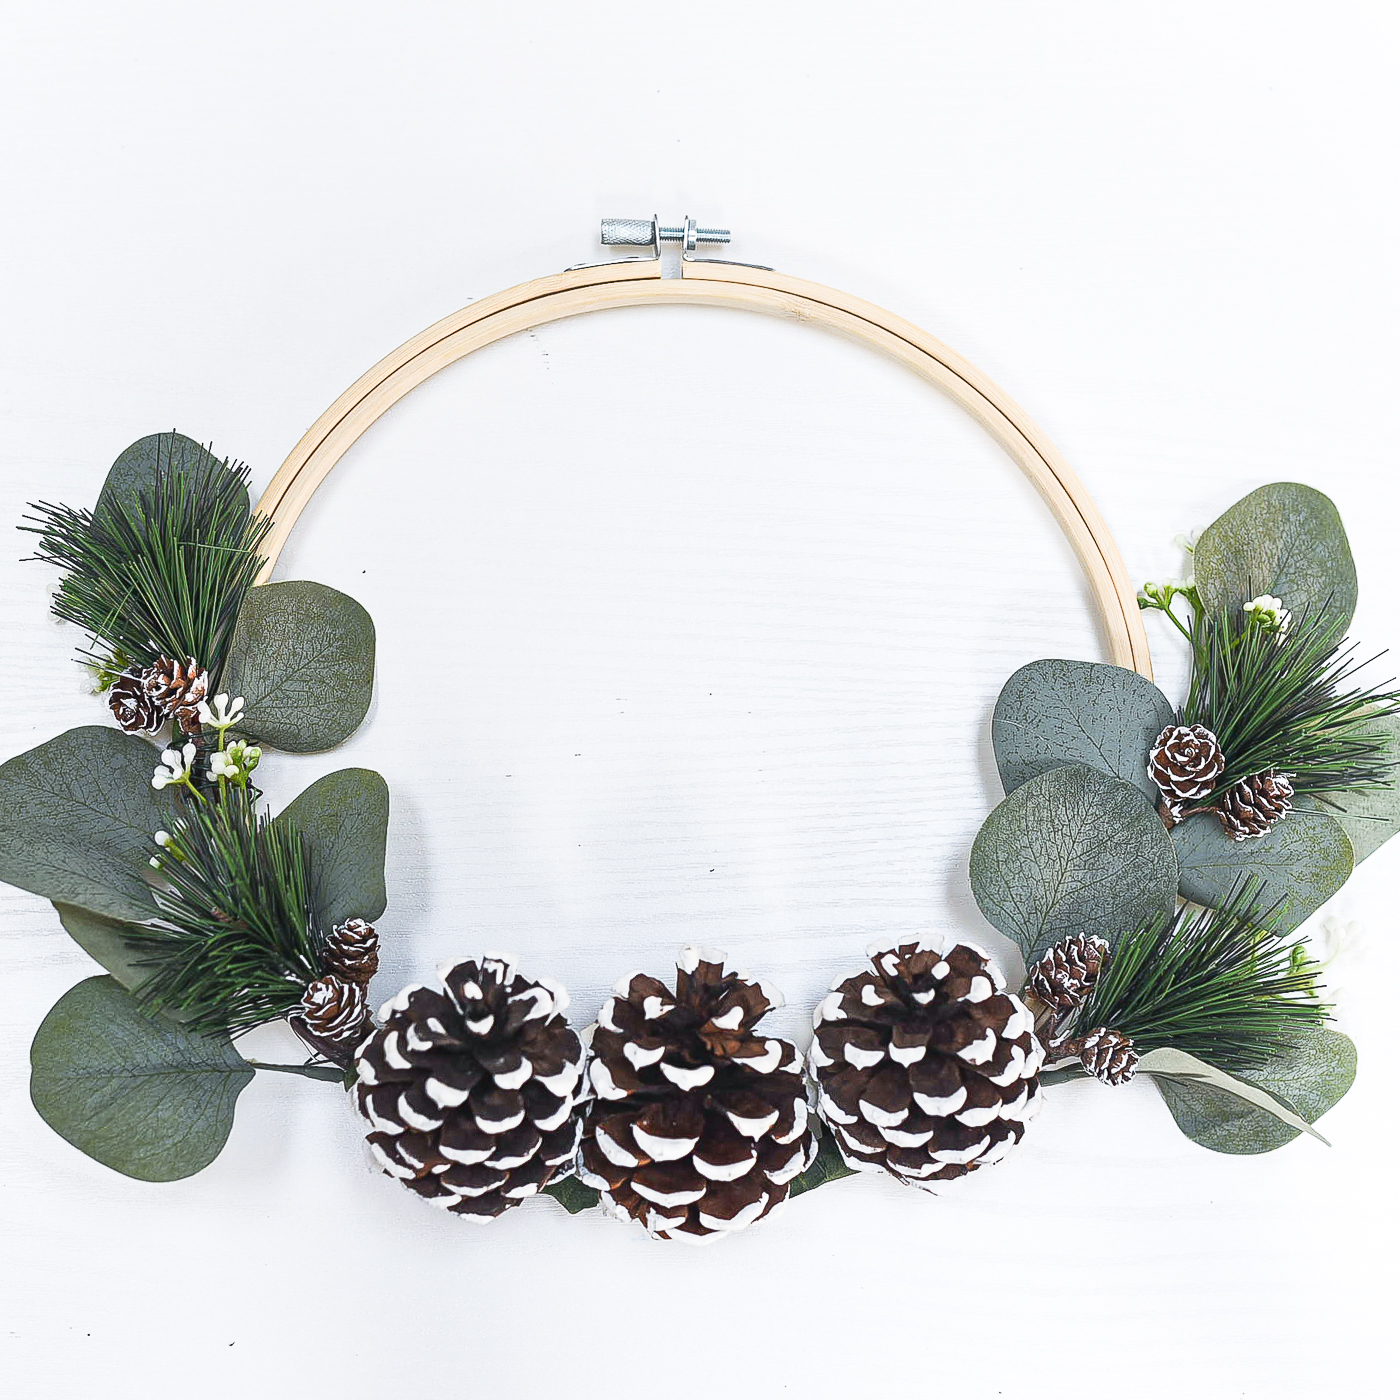 Embroidery Hoop Winter Wreath - It All Started With Paint